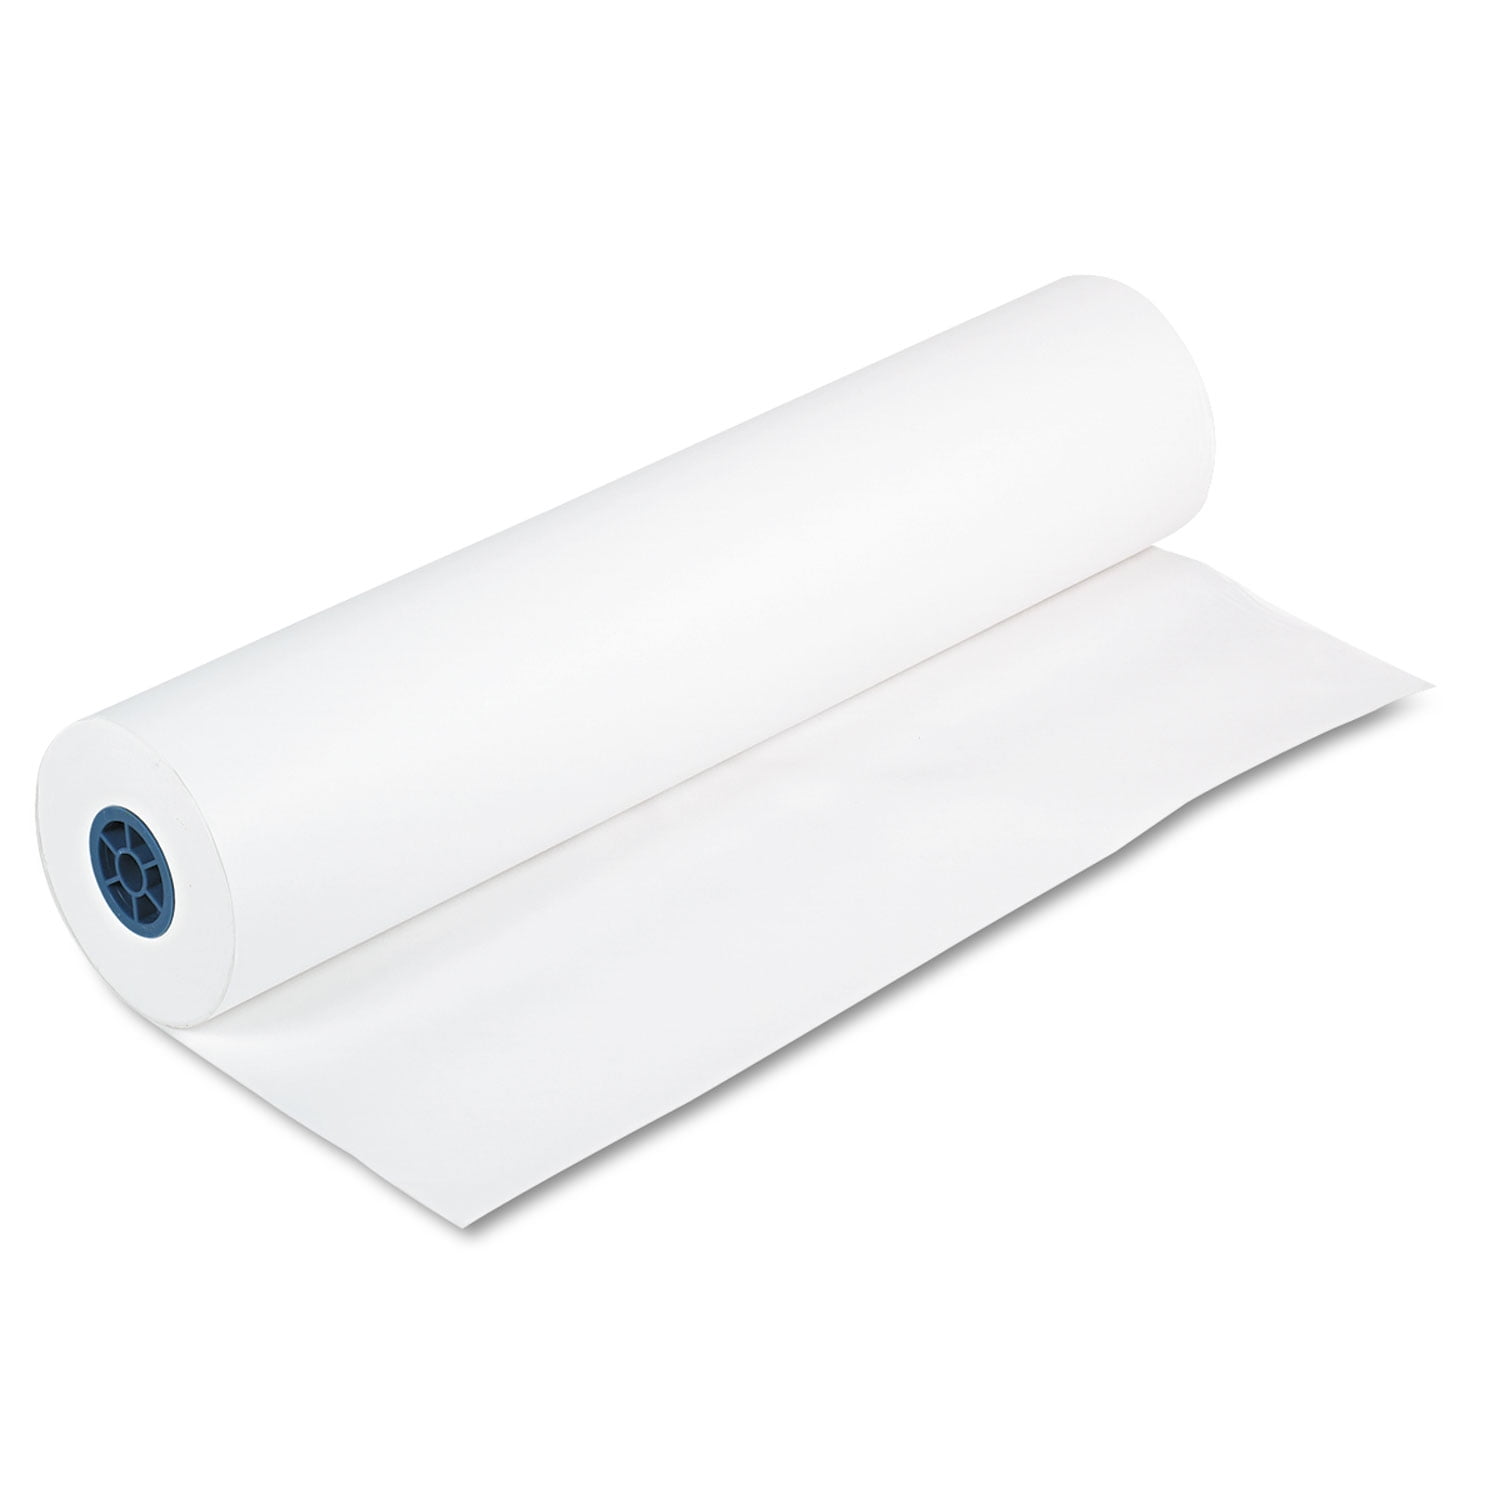 Brown Butcher Paper 1 Roll (26 lbs) - Case - 1 Units